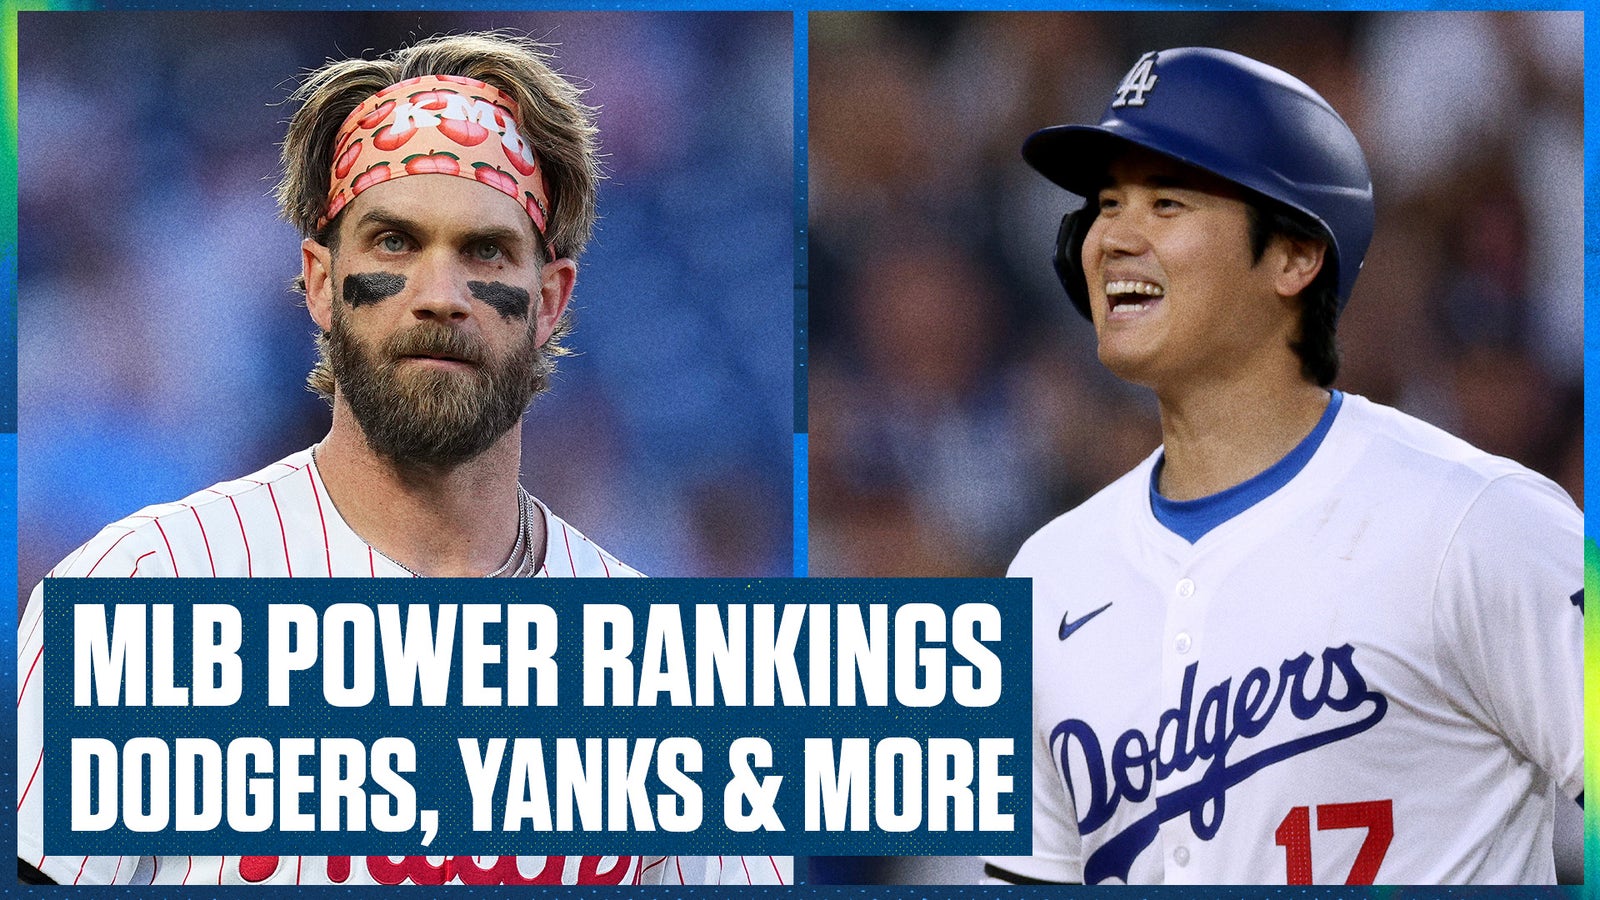 MLB Power Rankings: Yankees, Phillies, Dodgers battle for No. 1 spot